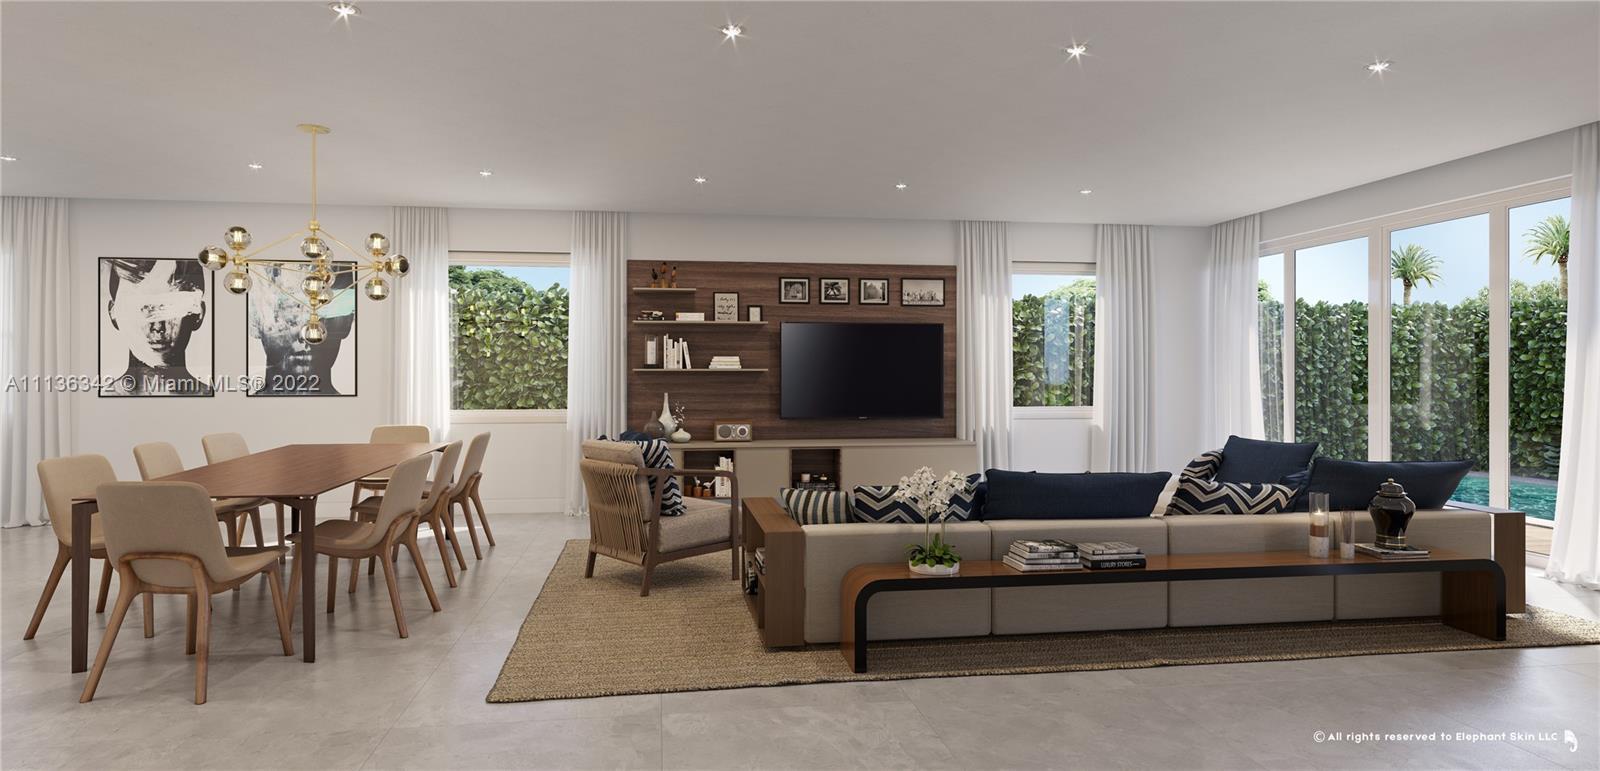 Galleria Villages is a limited collection of 24 new exclusive residences located East of Fort Lauder